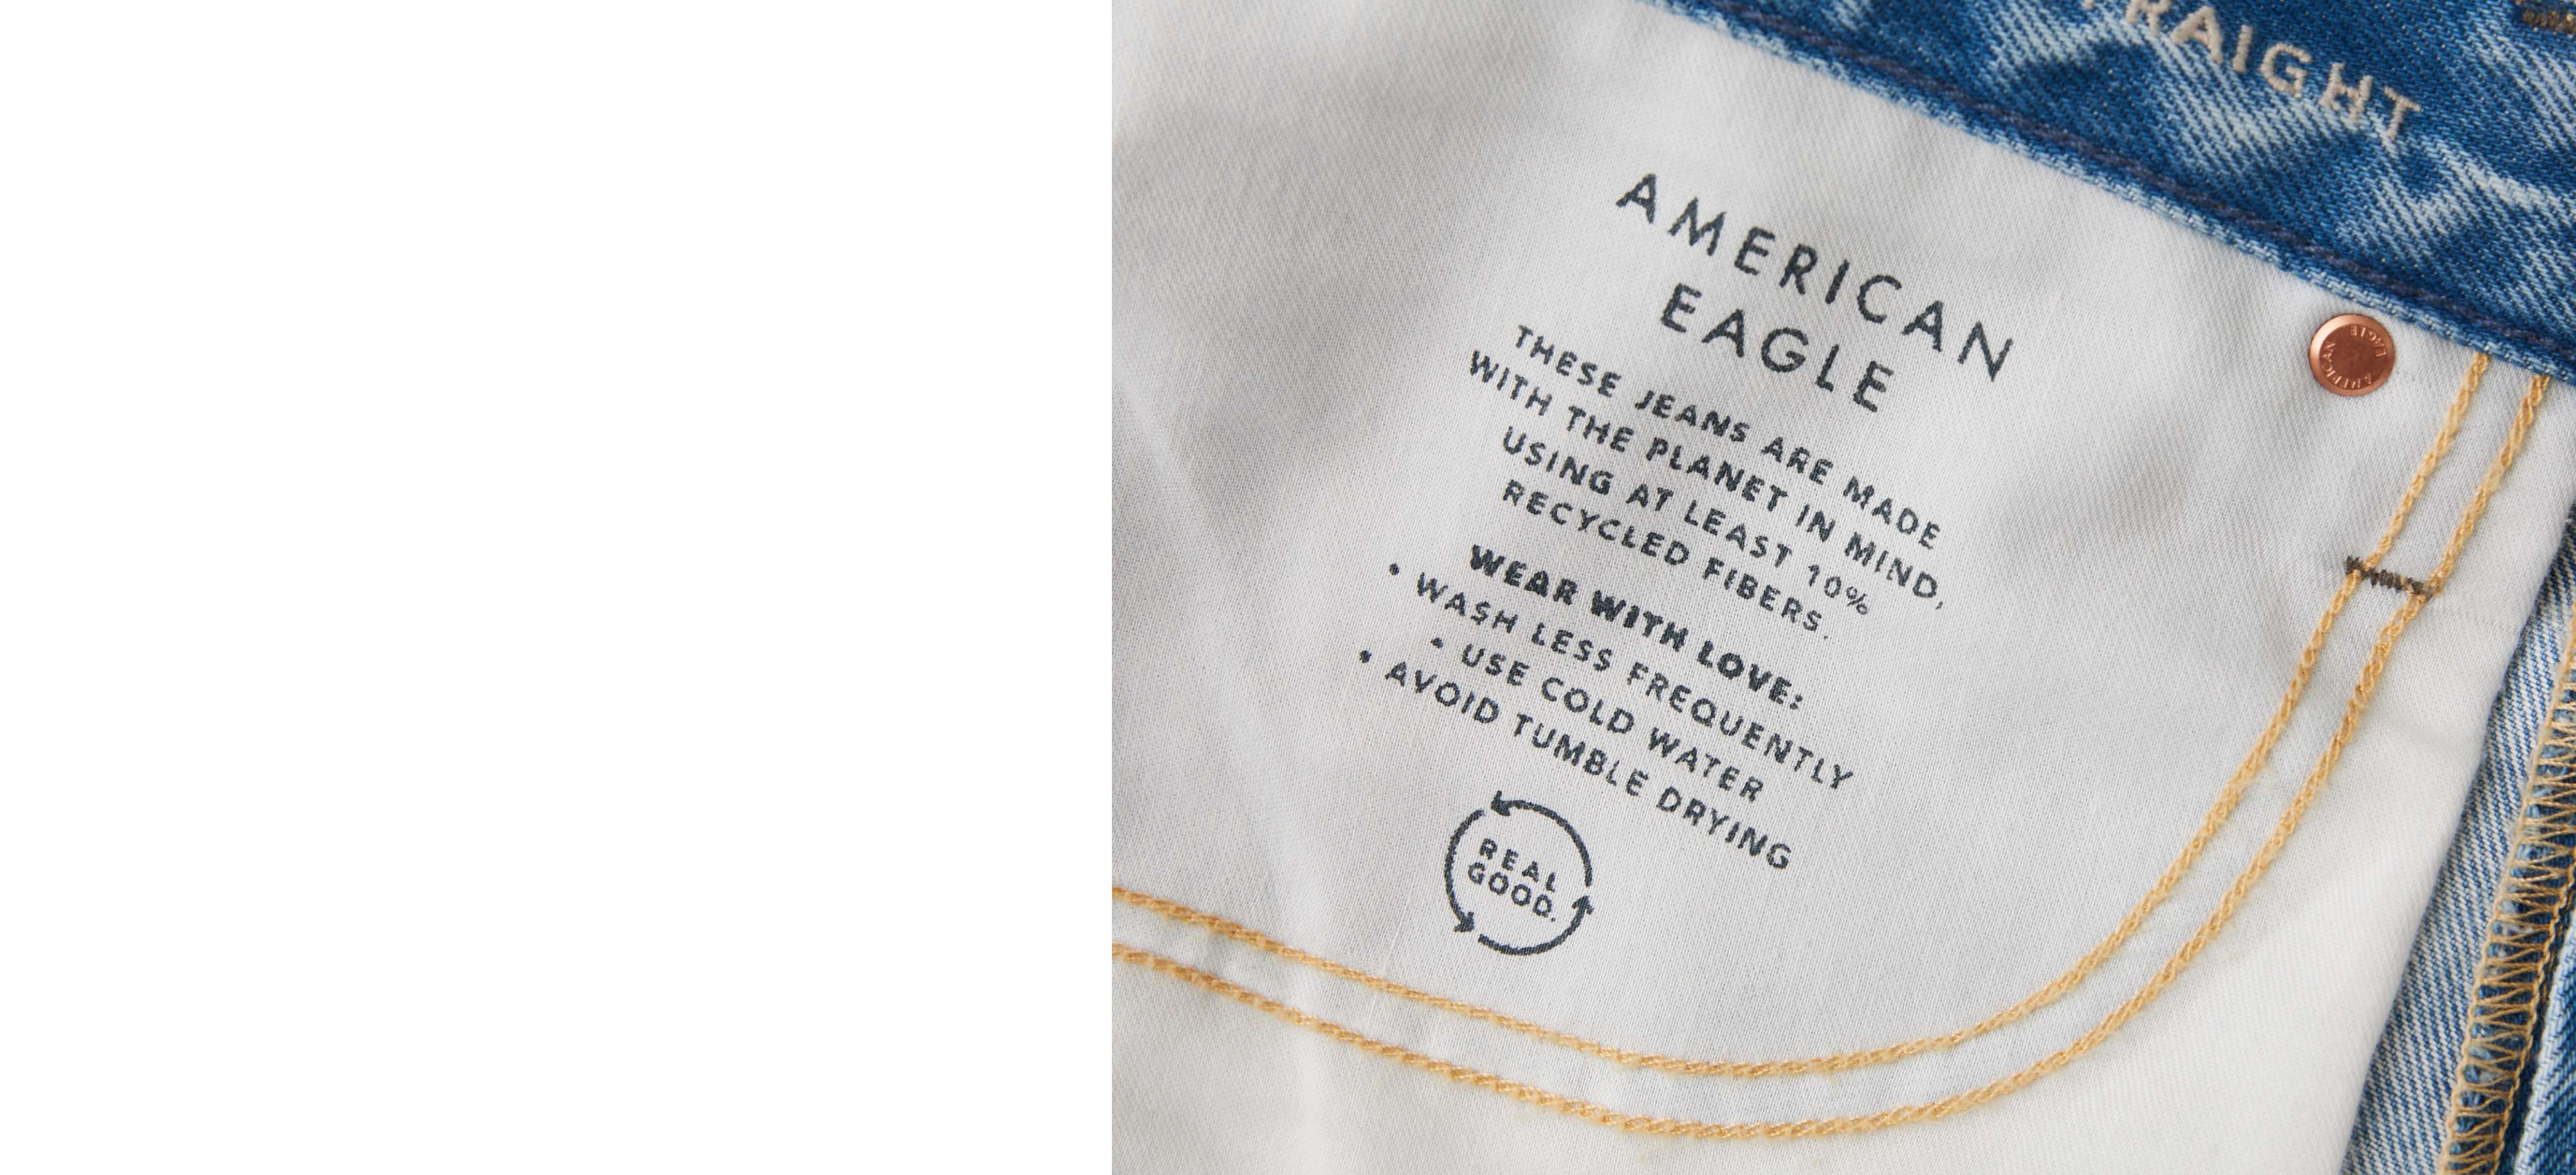 Why Aerie Has Become American Eagle Outfitters' Most Important Brand